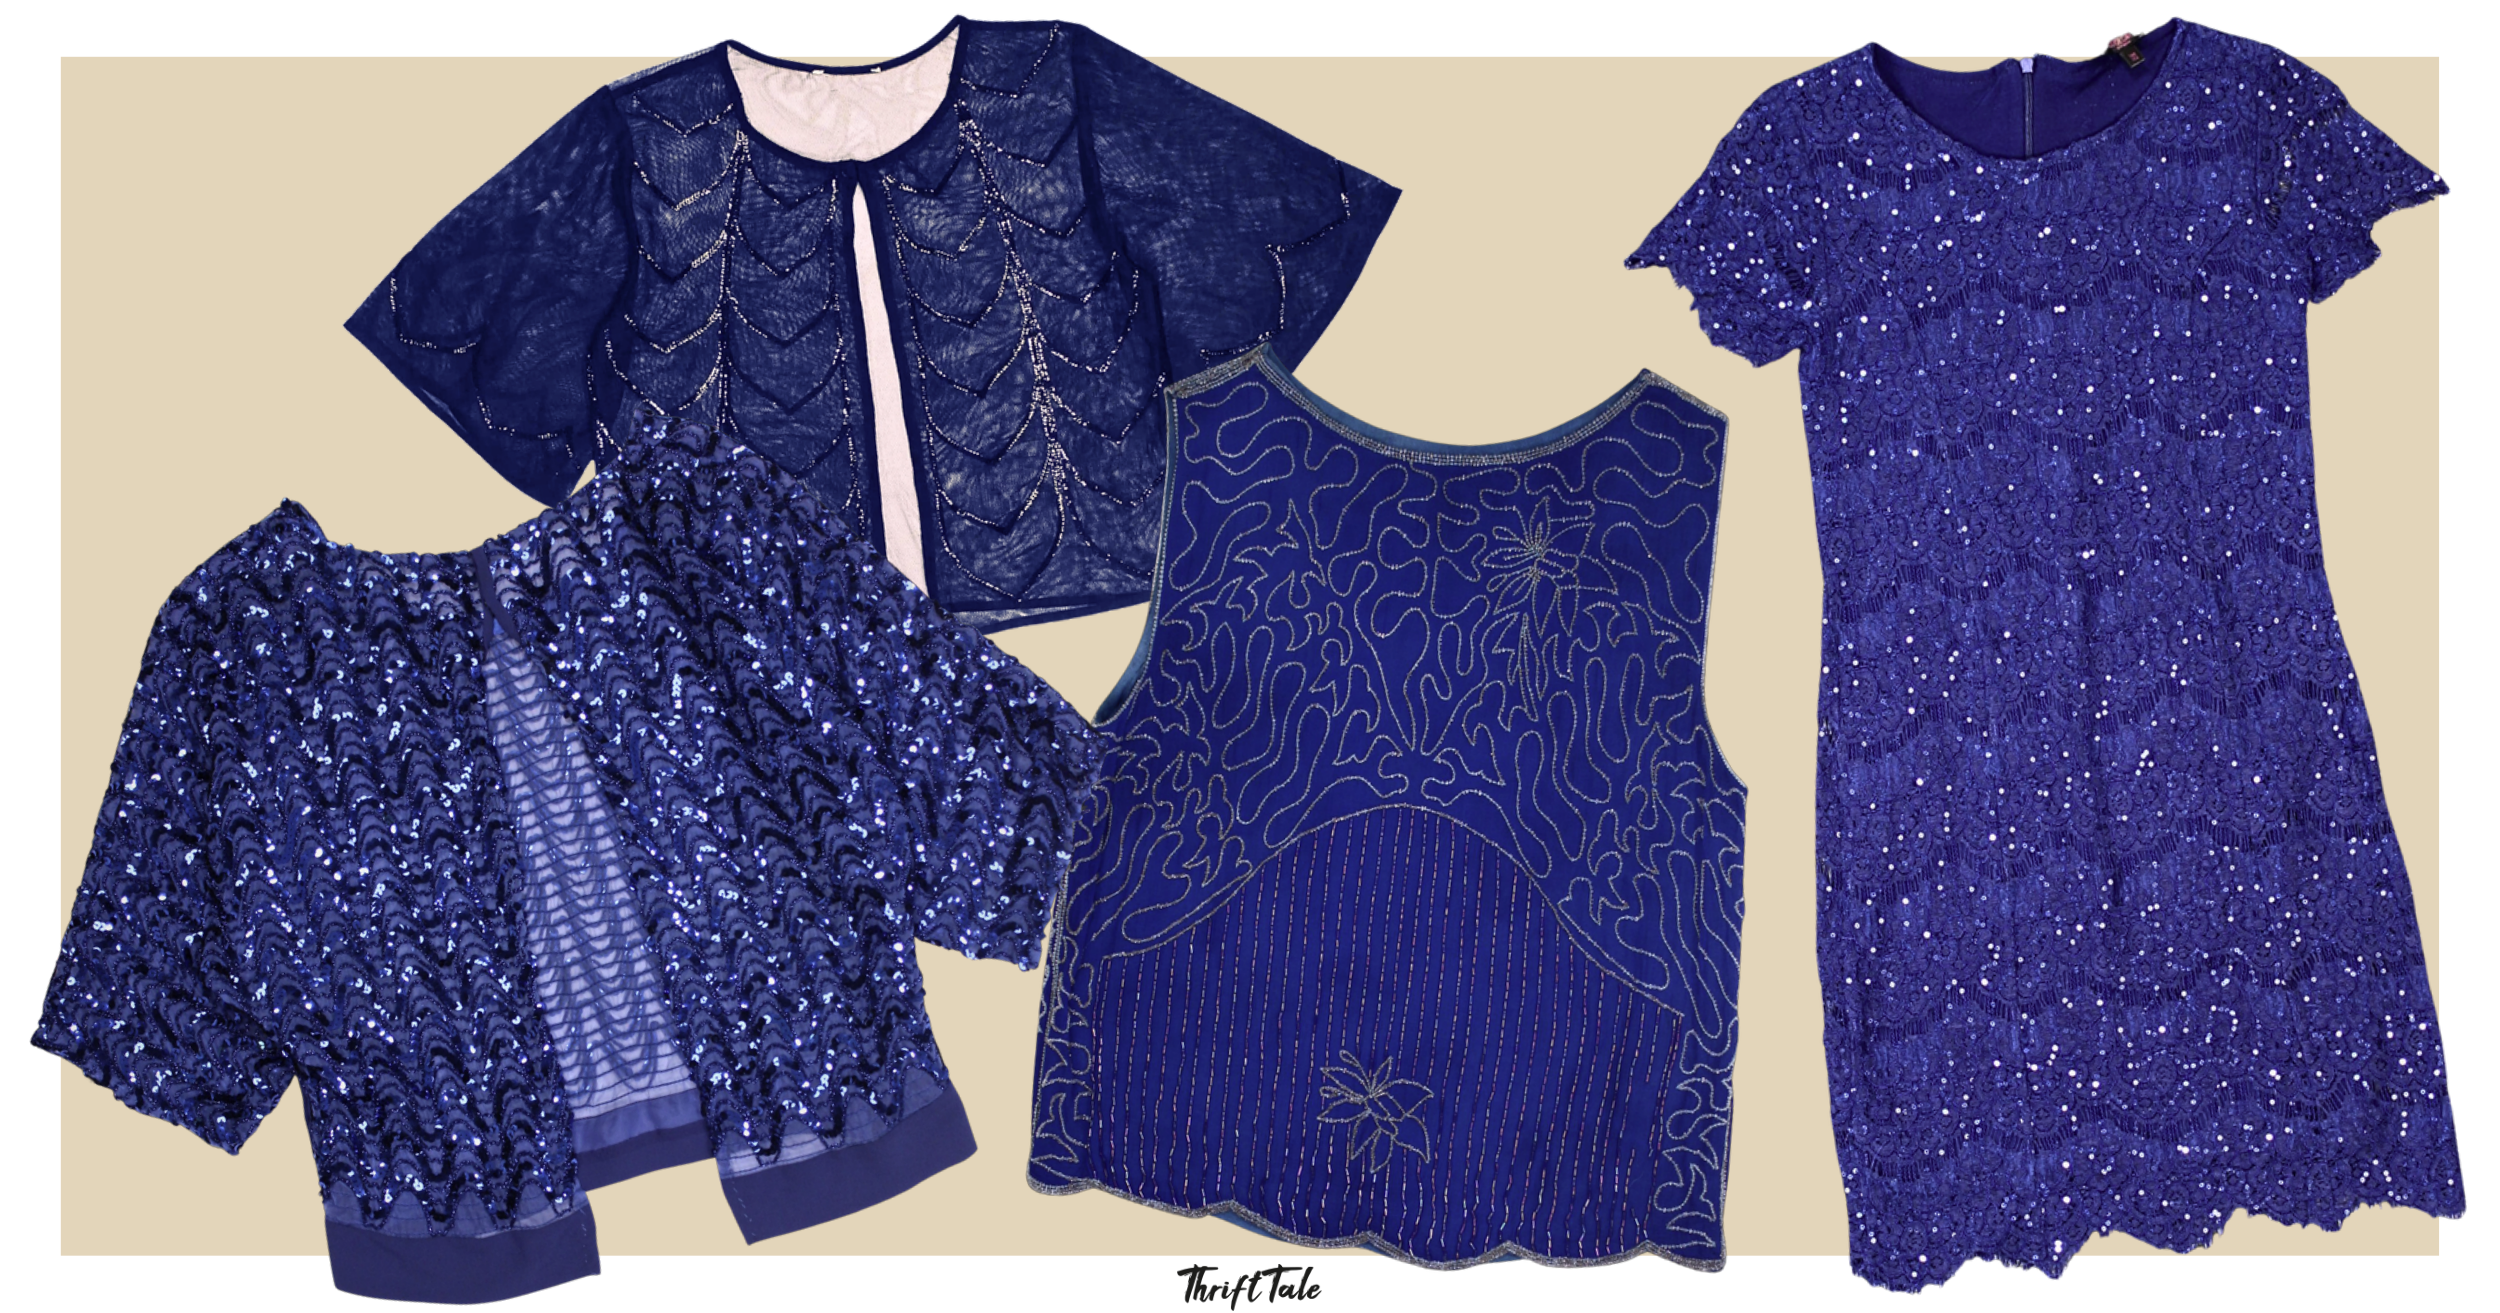 Taylor Swift Midnights tour outfits